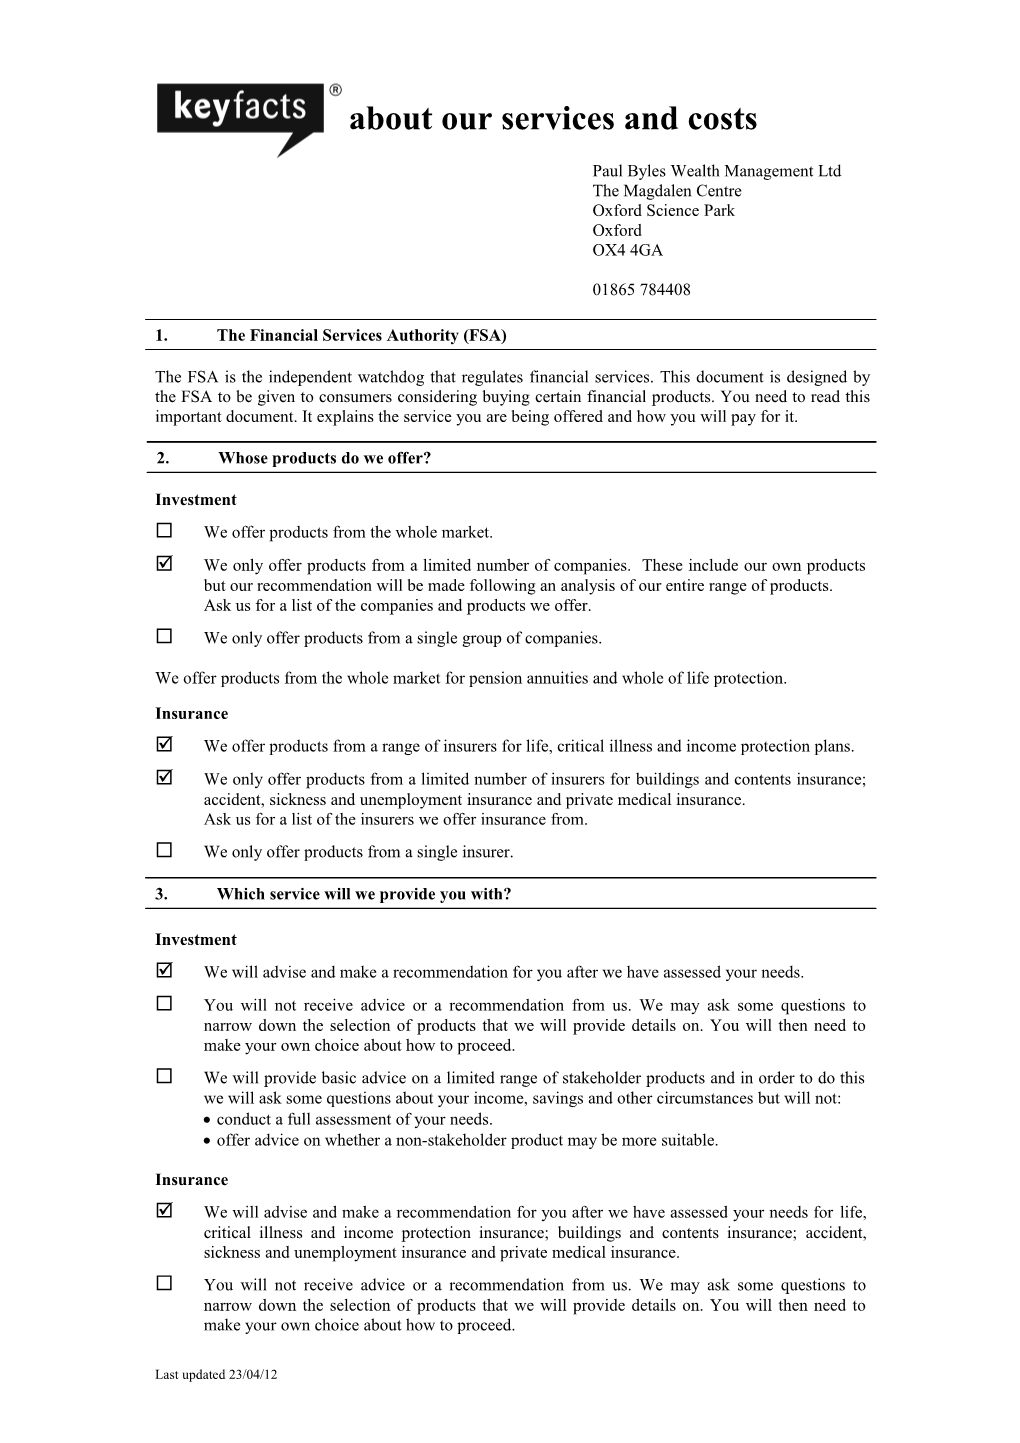 Example of a Combined Initial Disclosure Document All Products (CIDD)